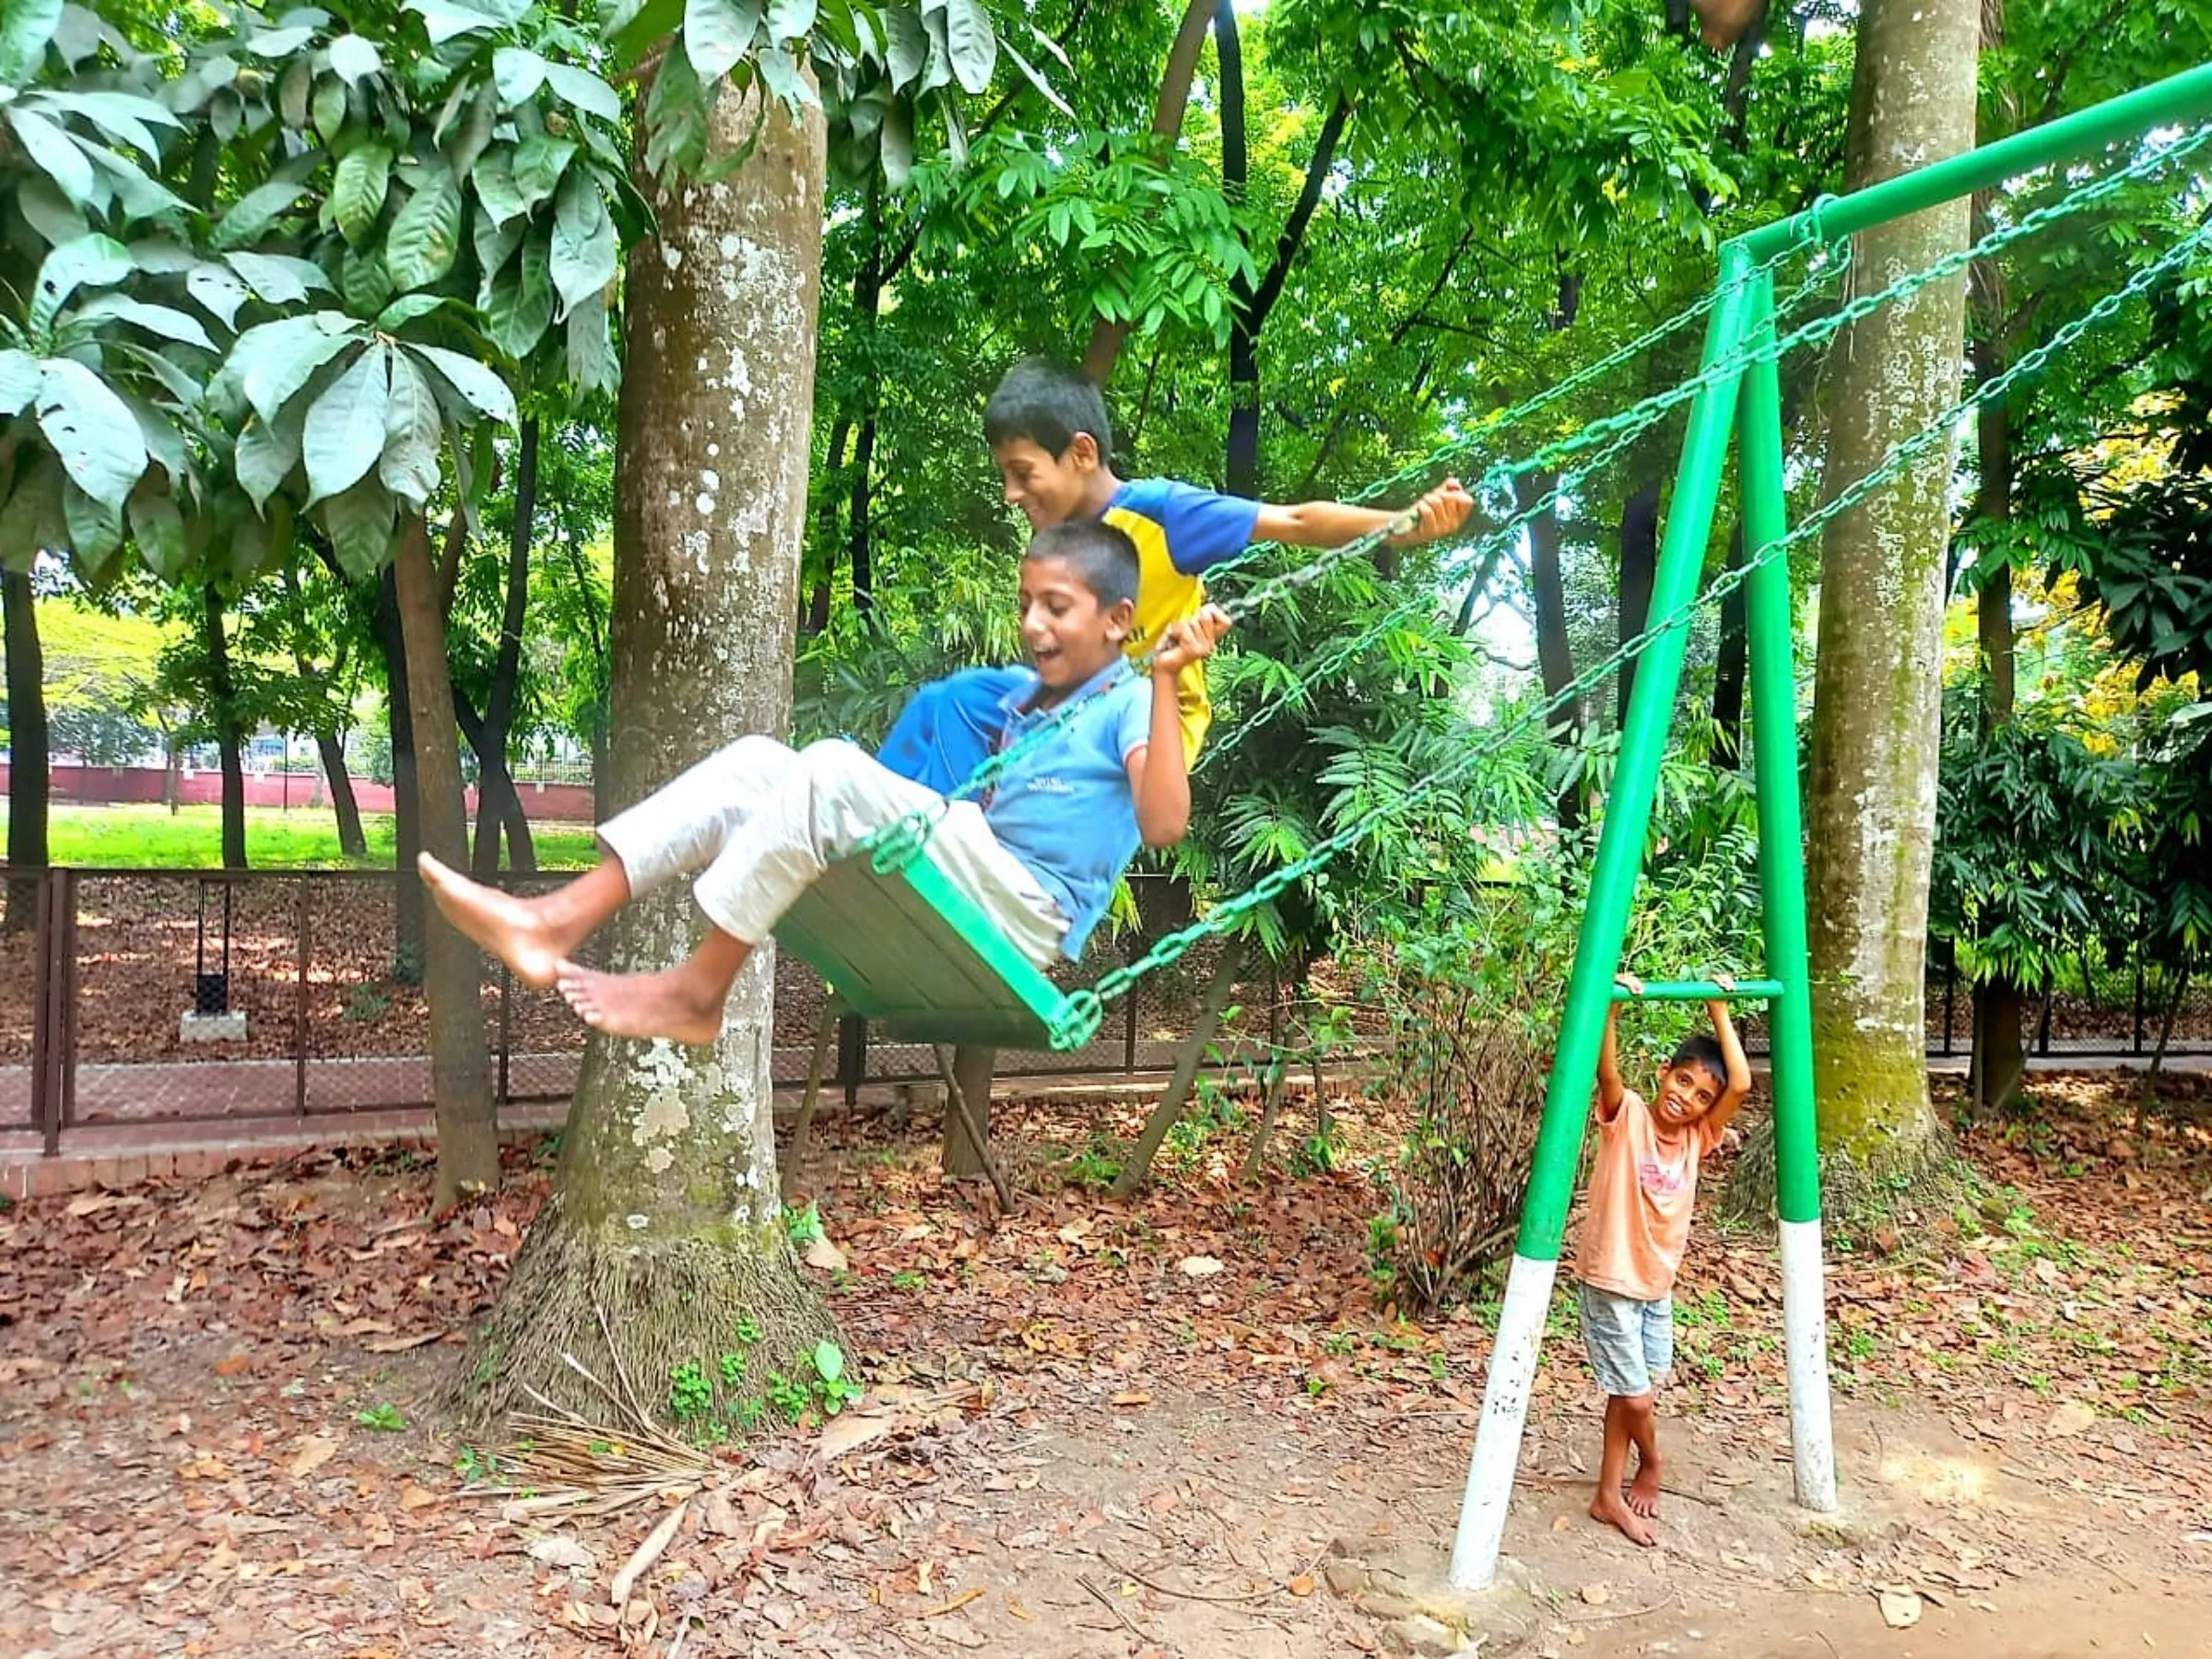 Mohammad Arif, 12 and his 10-year old brother Arafat play on a swing bench in Ramna Park after school, Dhaka, April 3, 2023, Thomson Reuters Foundation/ Md Tahmid Zami